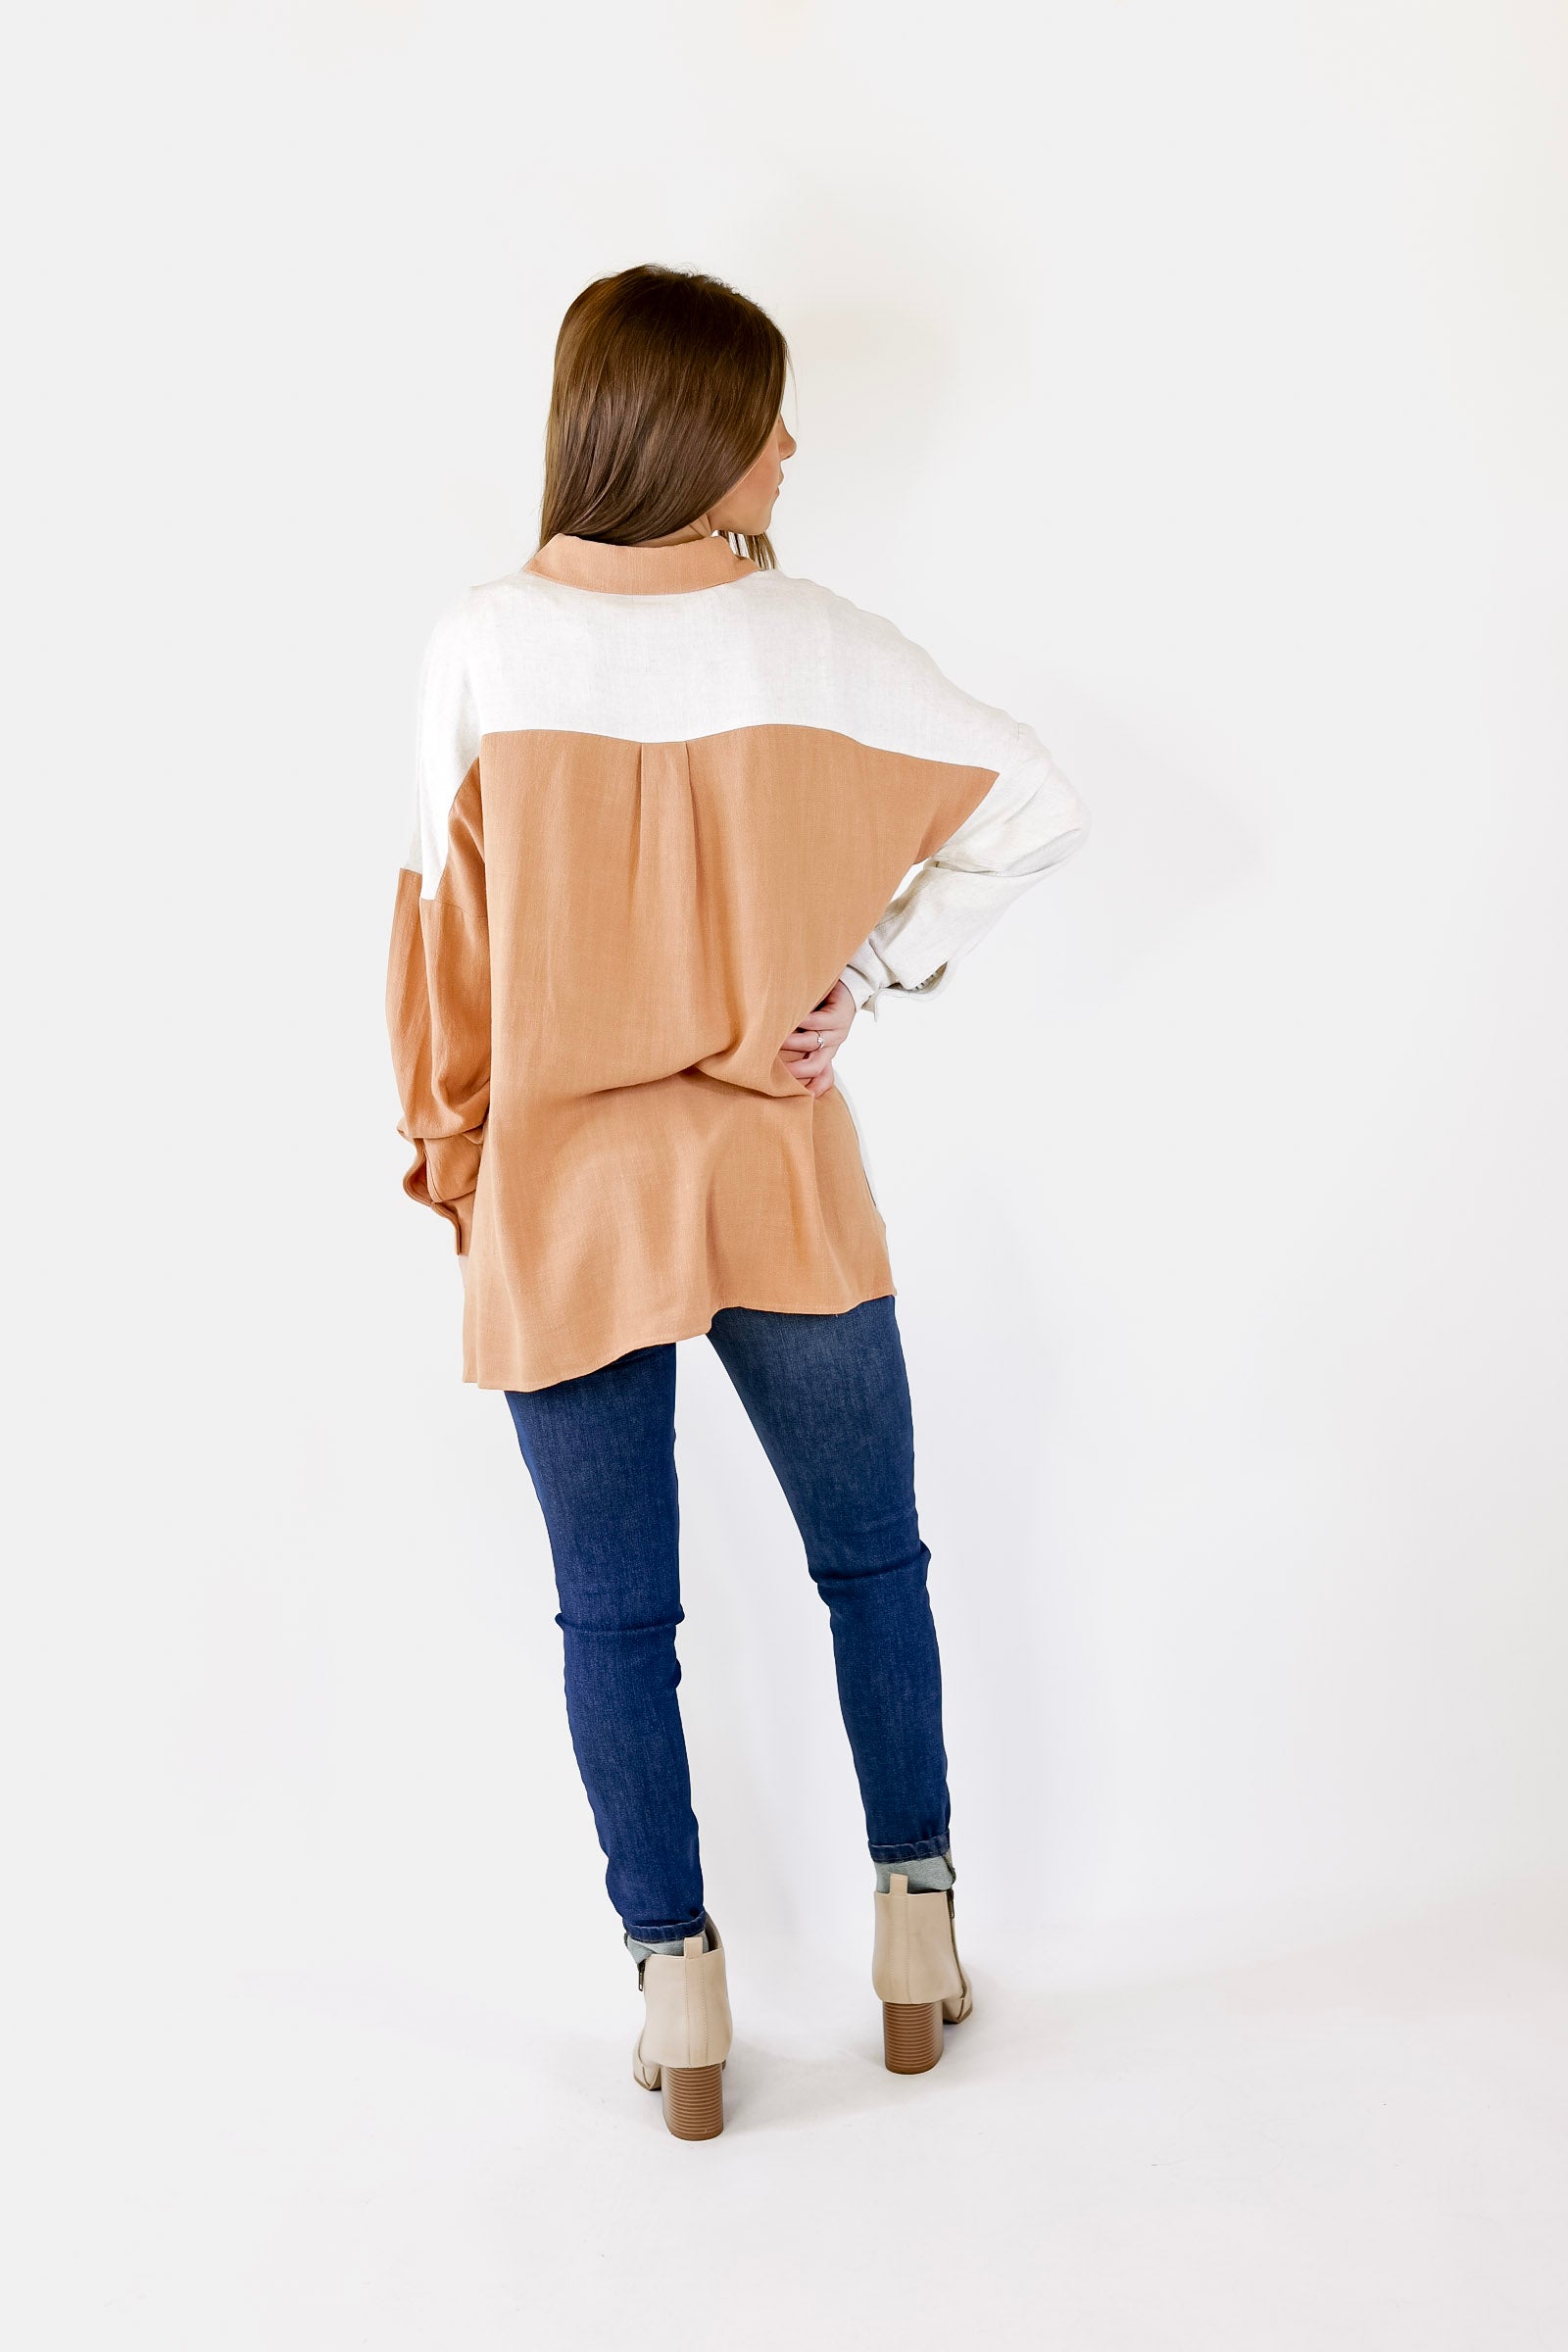 Follow Me Long Sleeve Button Up Color Block Top in Terracotta - Giddy Up Glamour Boutique